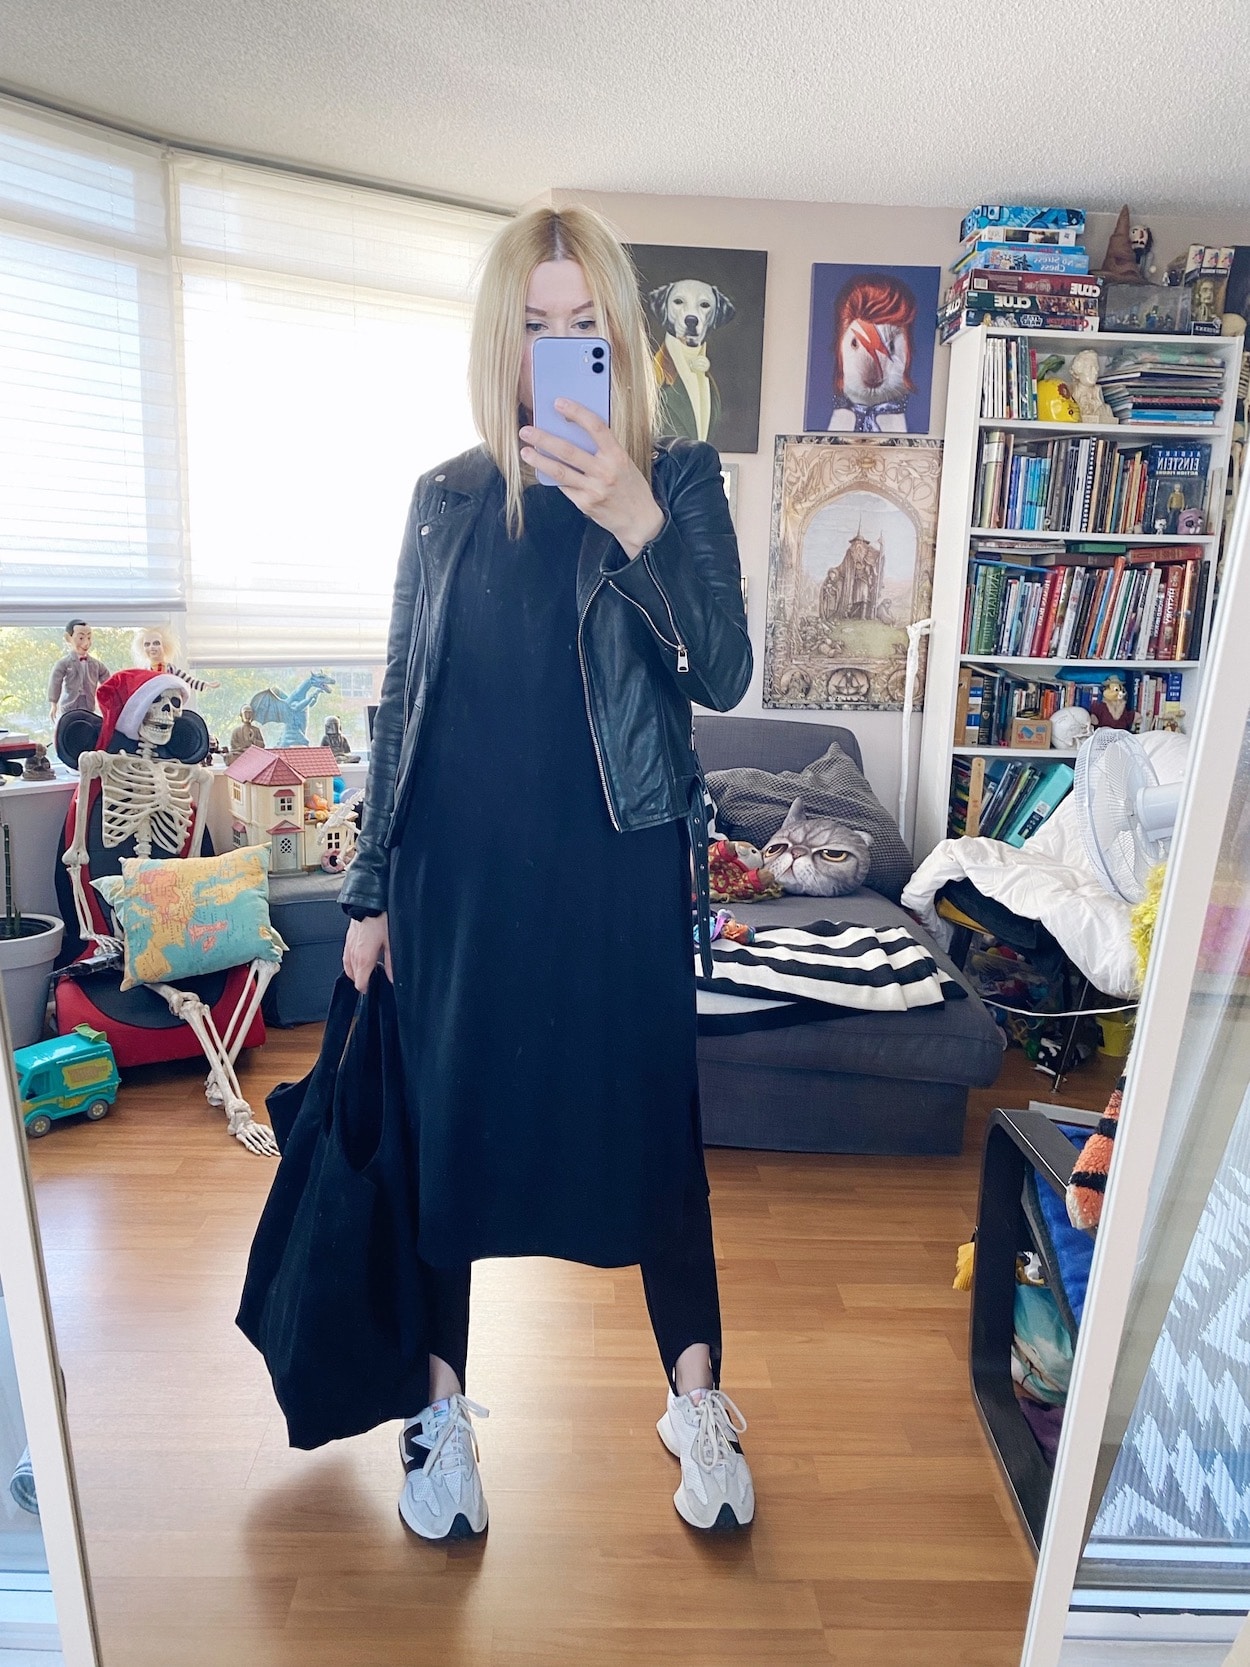 I am wearing a black midi dress, stirrups, a leather jacker, New Balance sneakers, and a black tote.